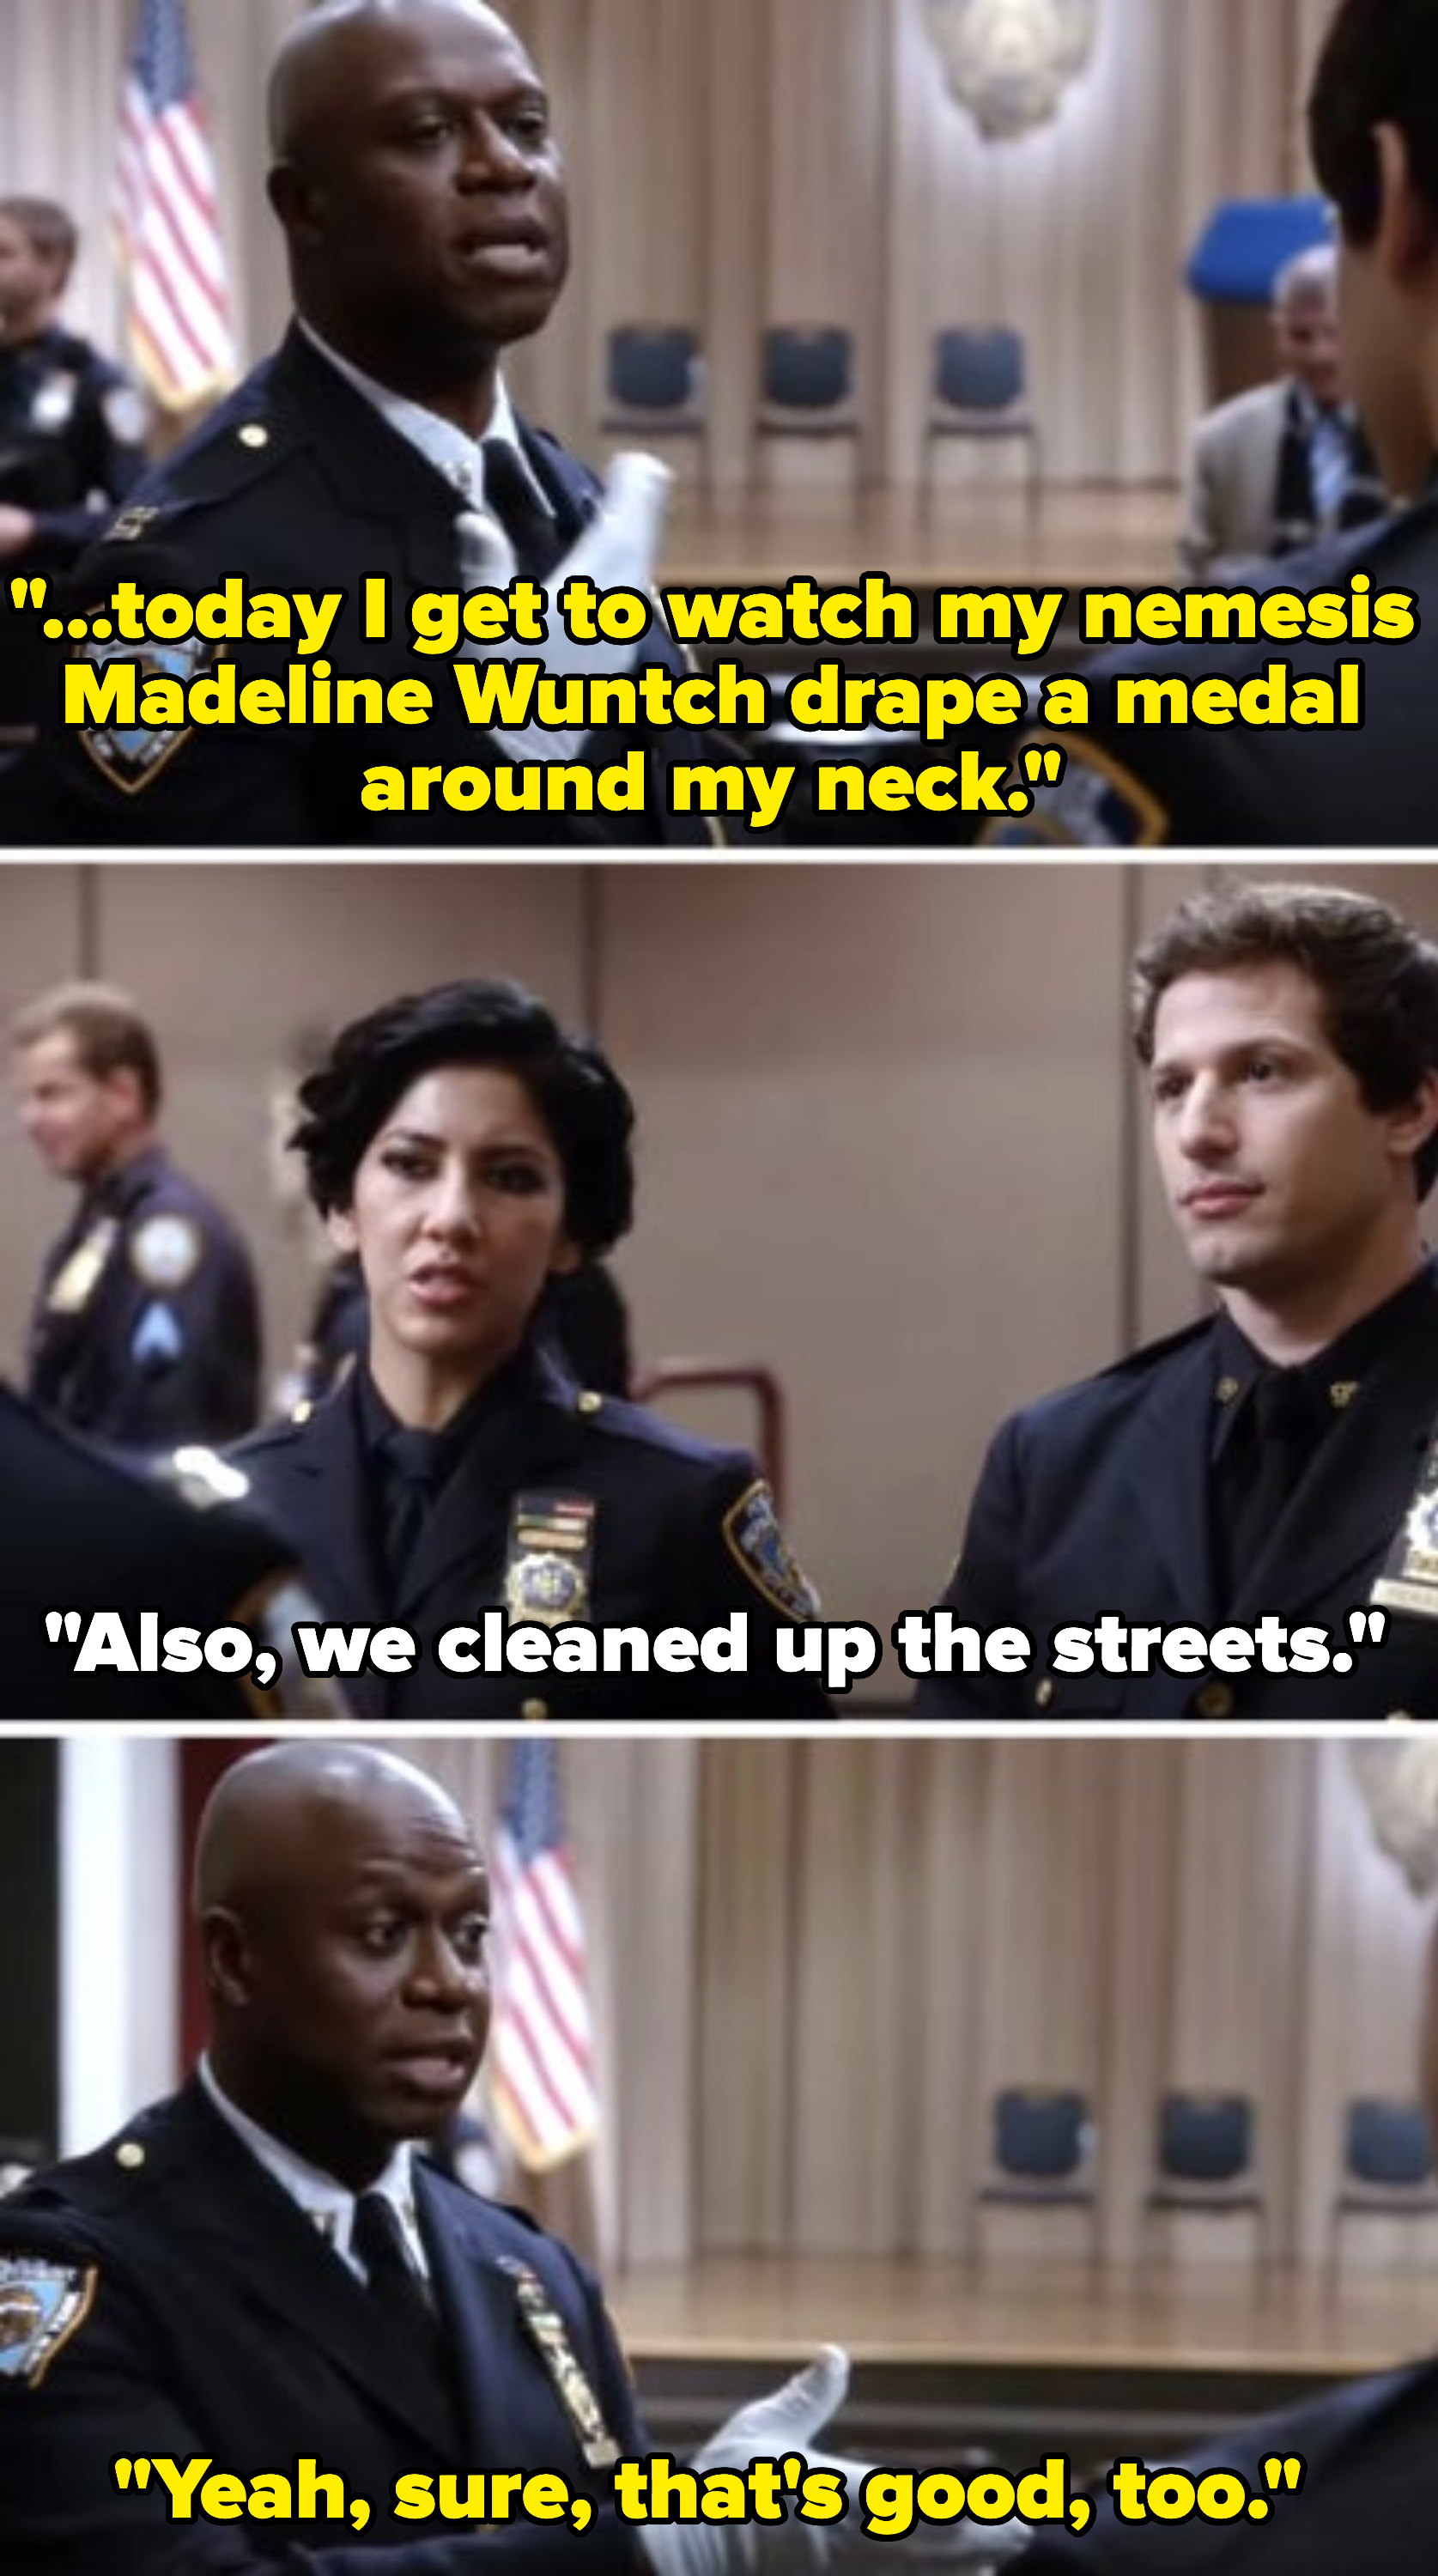 holt talks about how happy he is to own his arch nemesis